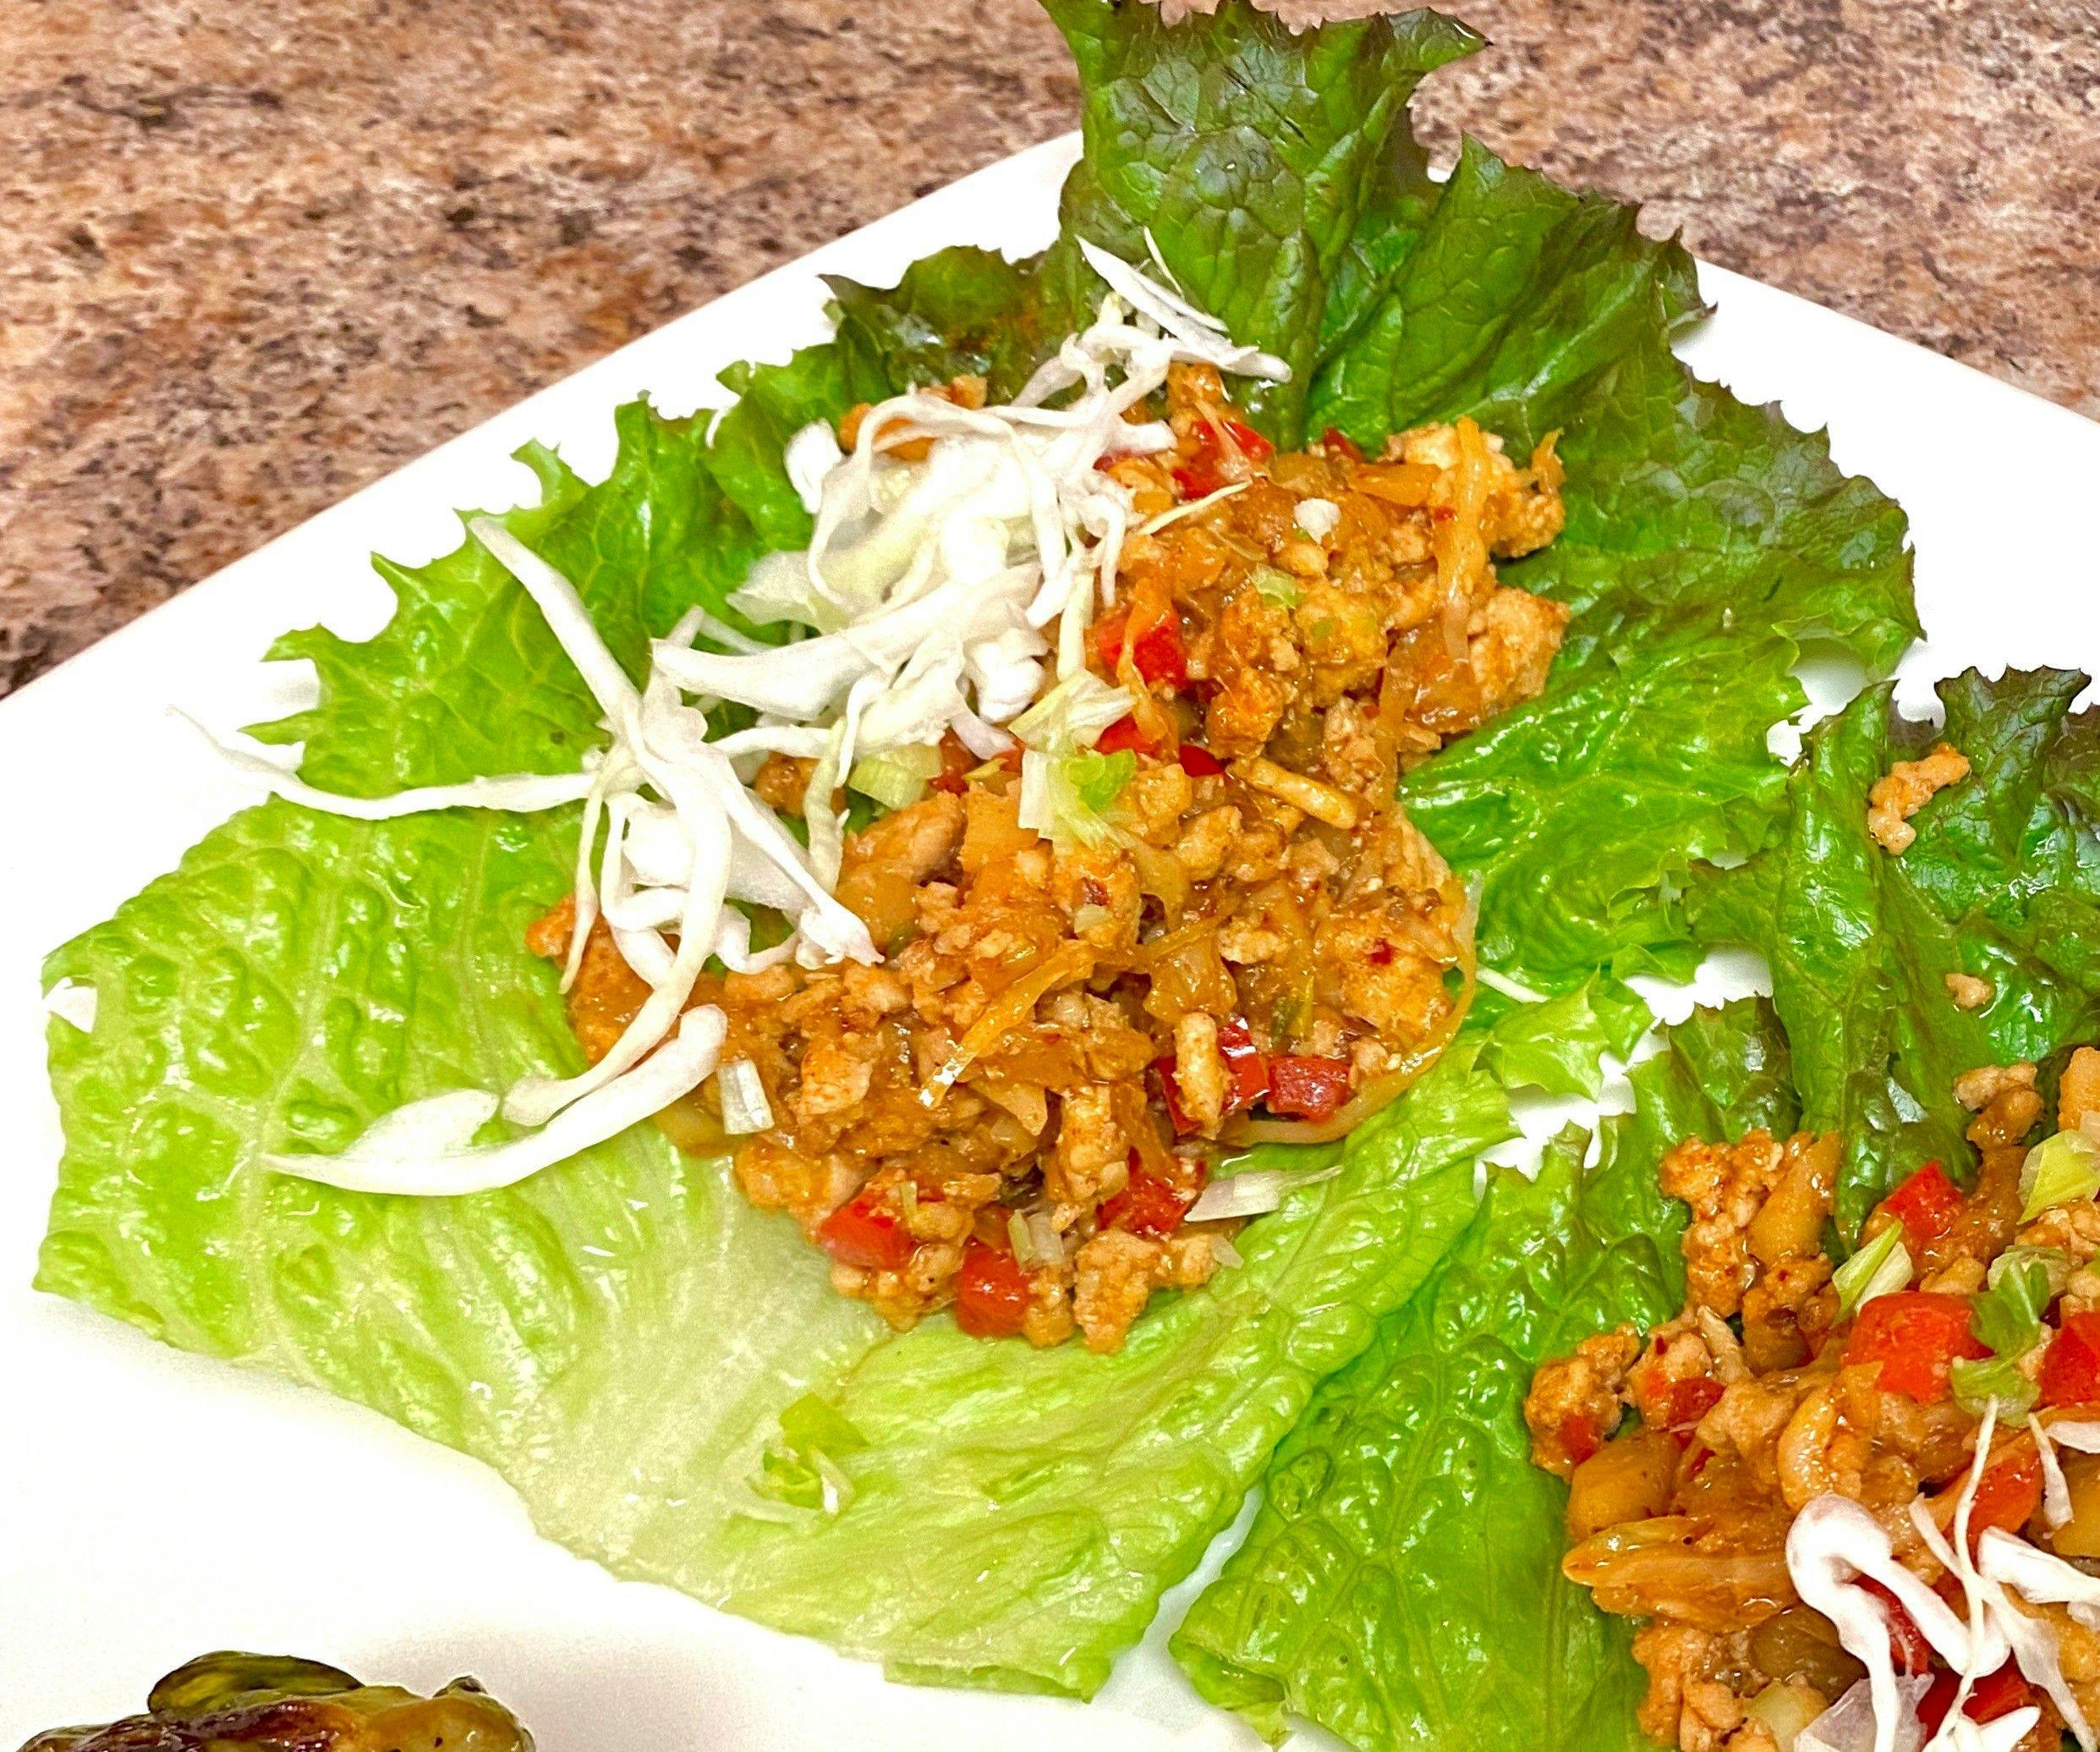 lettuce wrap, recipe, cooking, nutrition, cancer